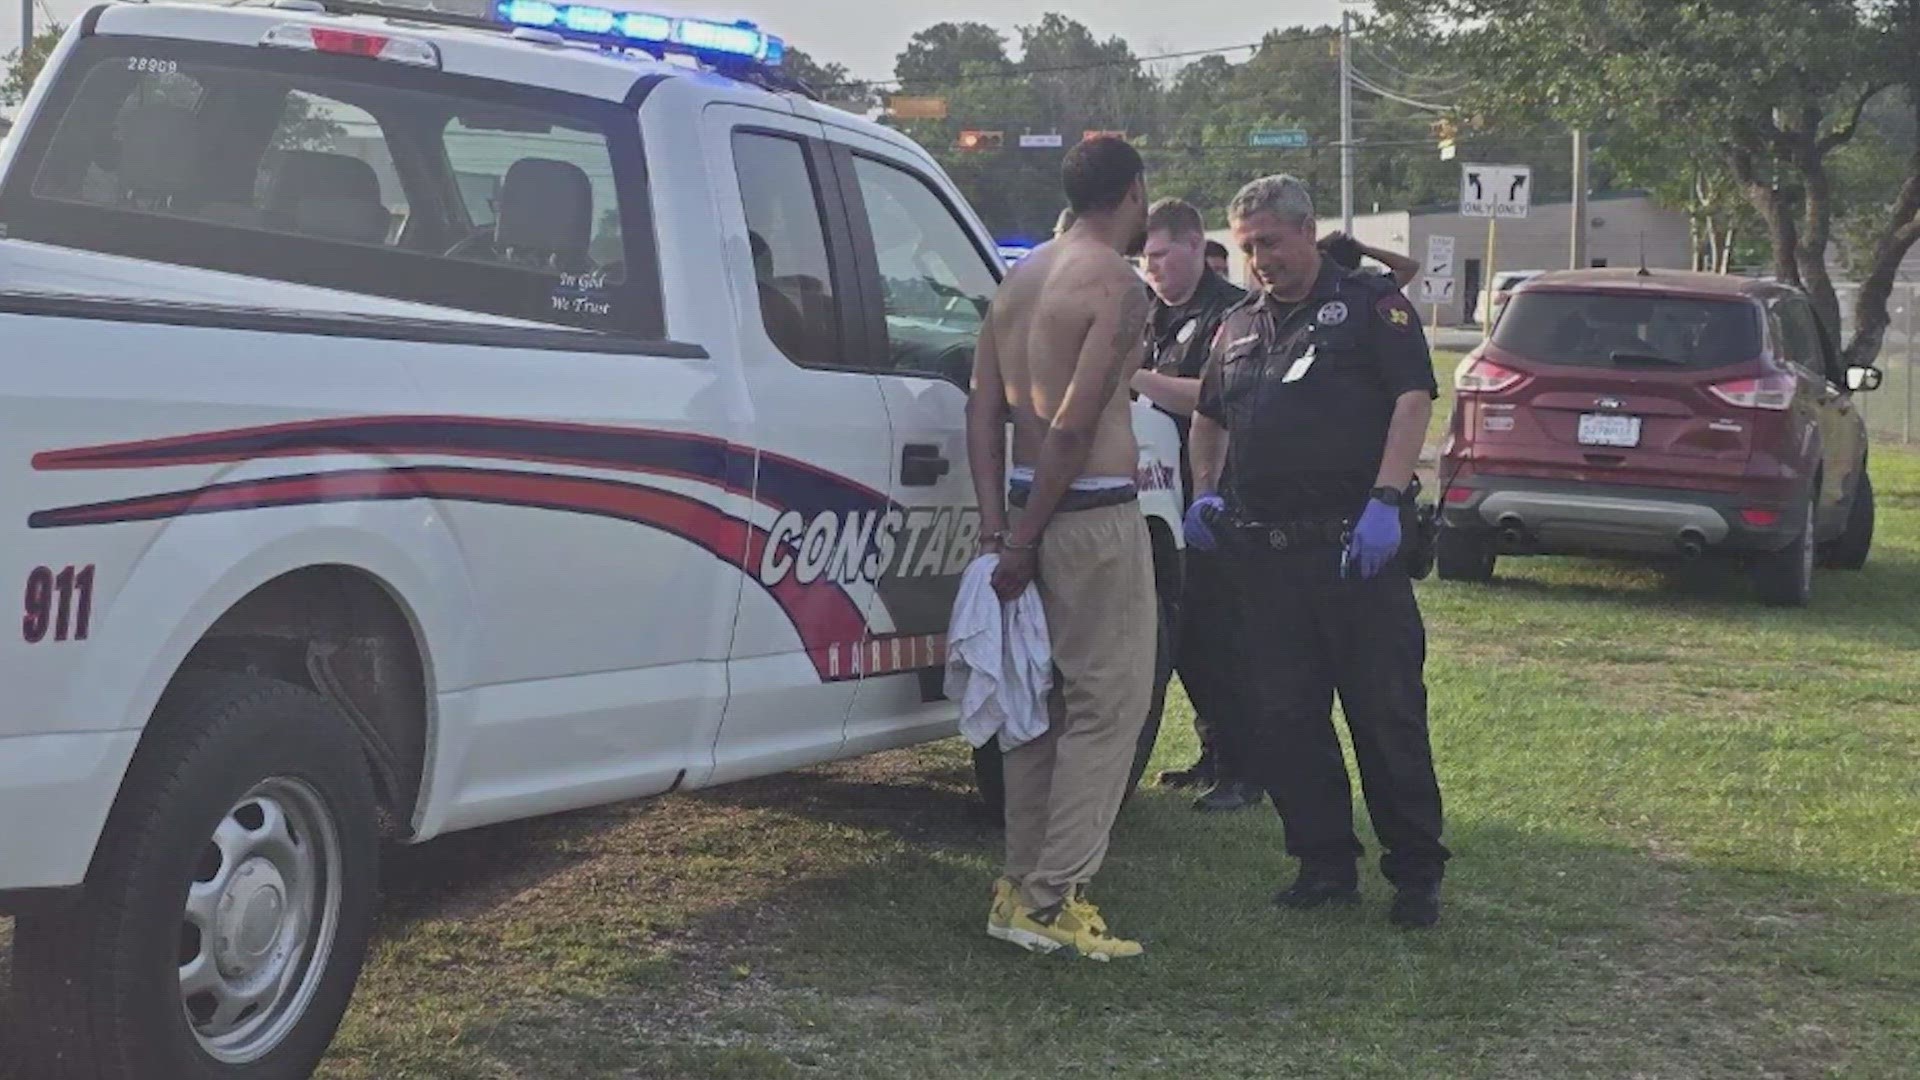 A man who authorities said tried to escape from a Harris County correctional facility on the northeast side was caught Friday, April 19.